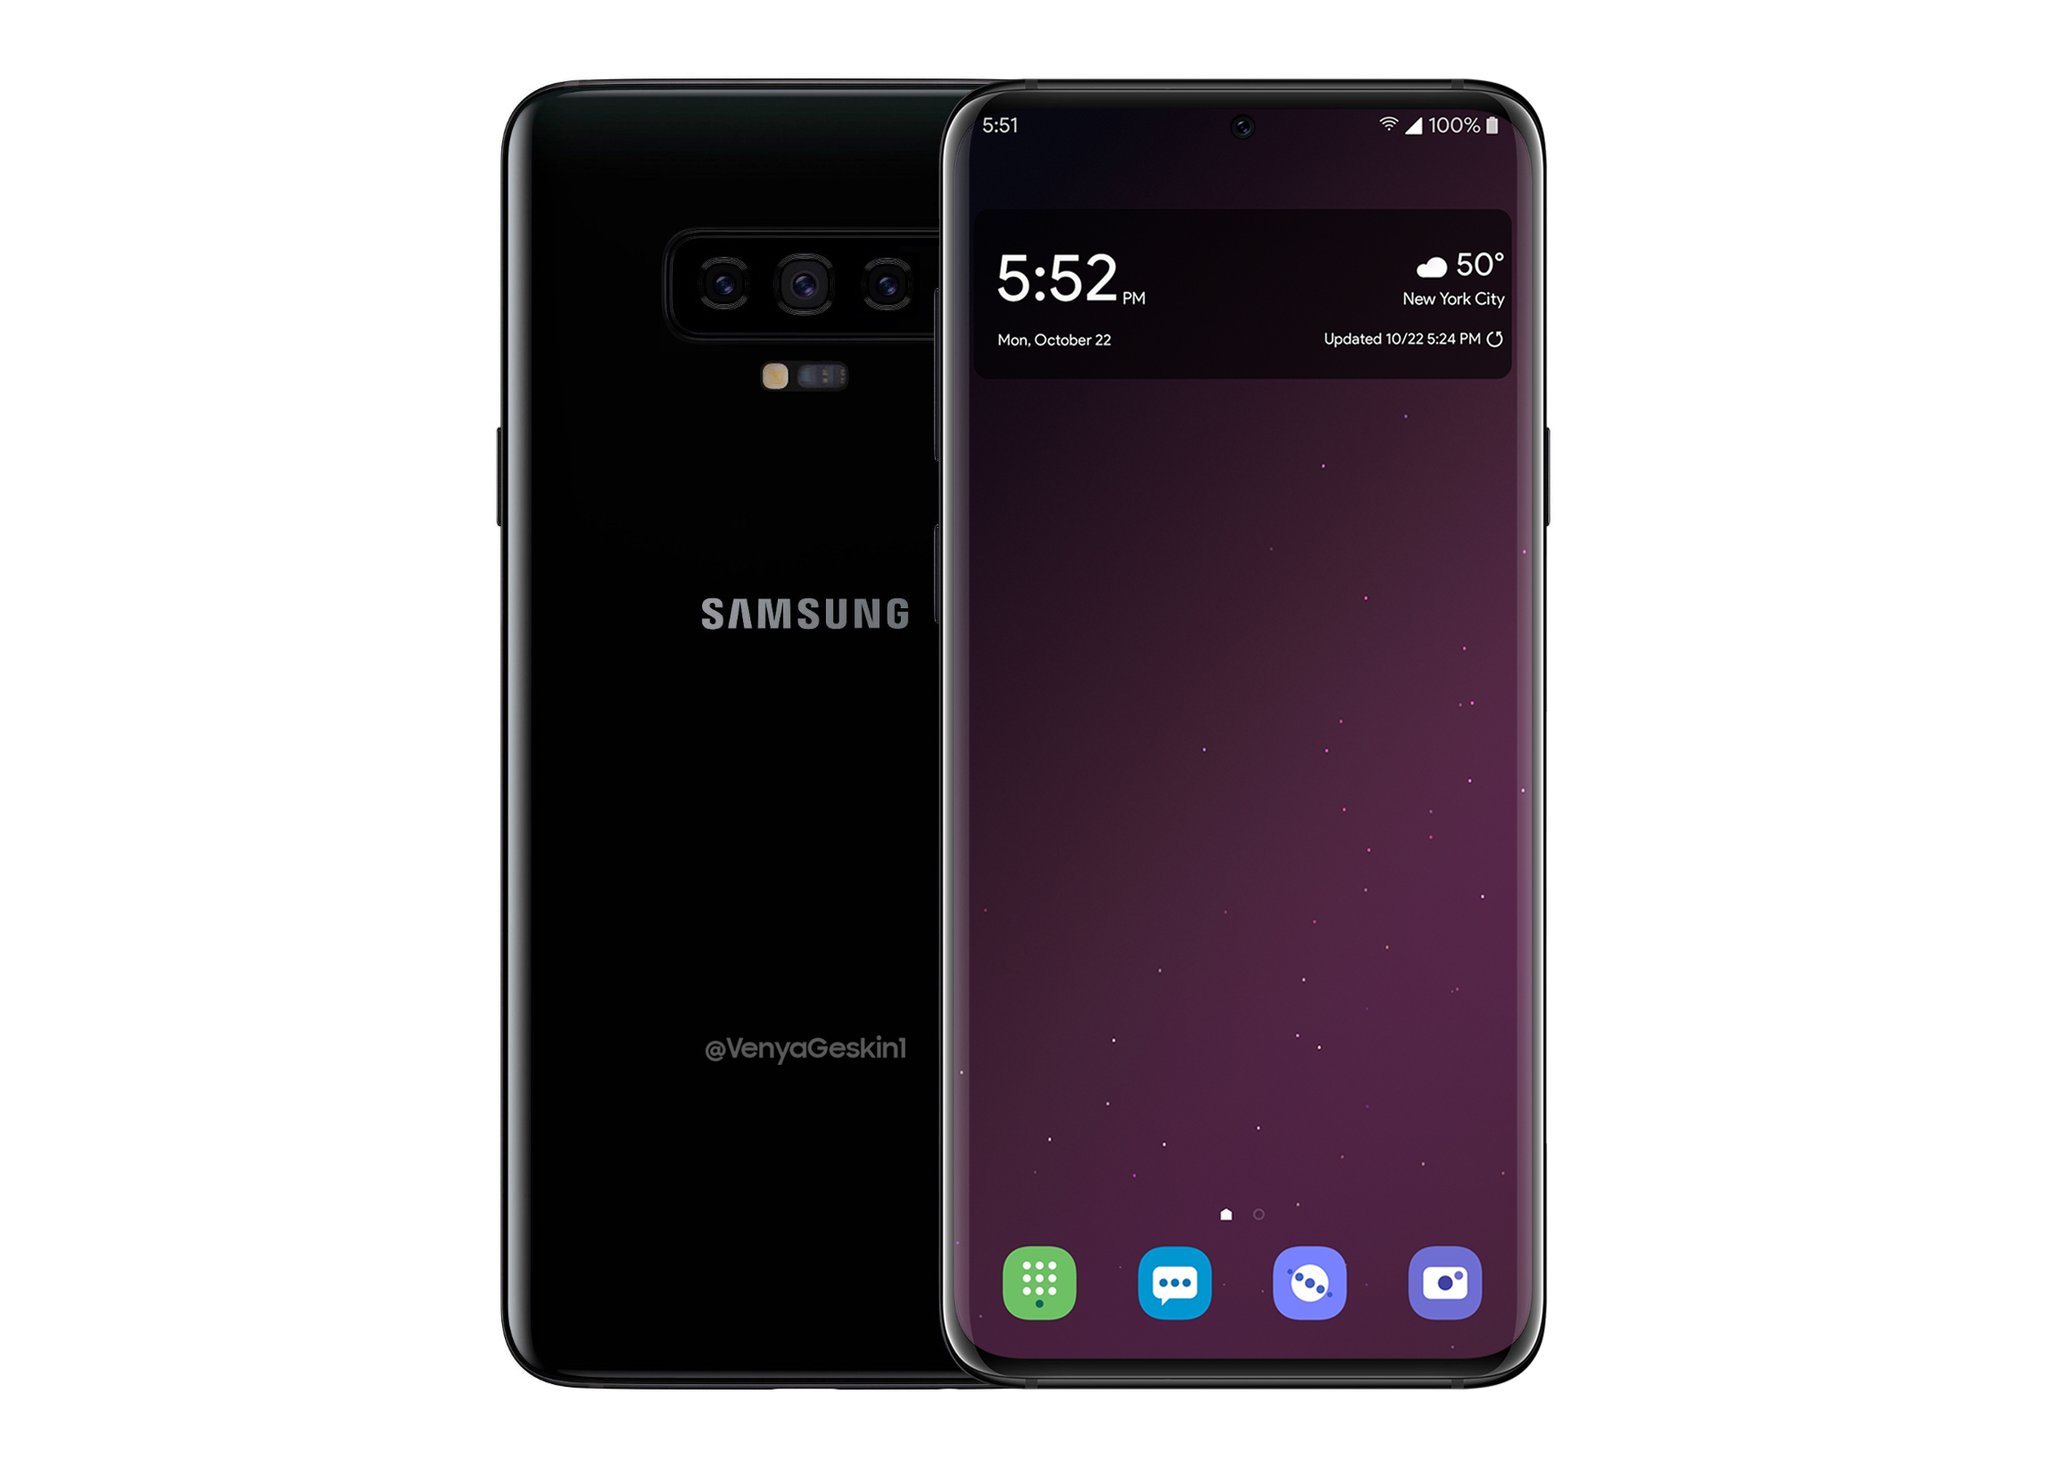 Samsung GALAXY S10 Android 9 1